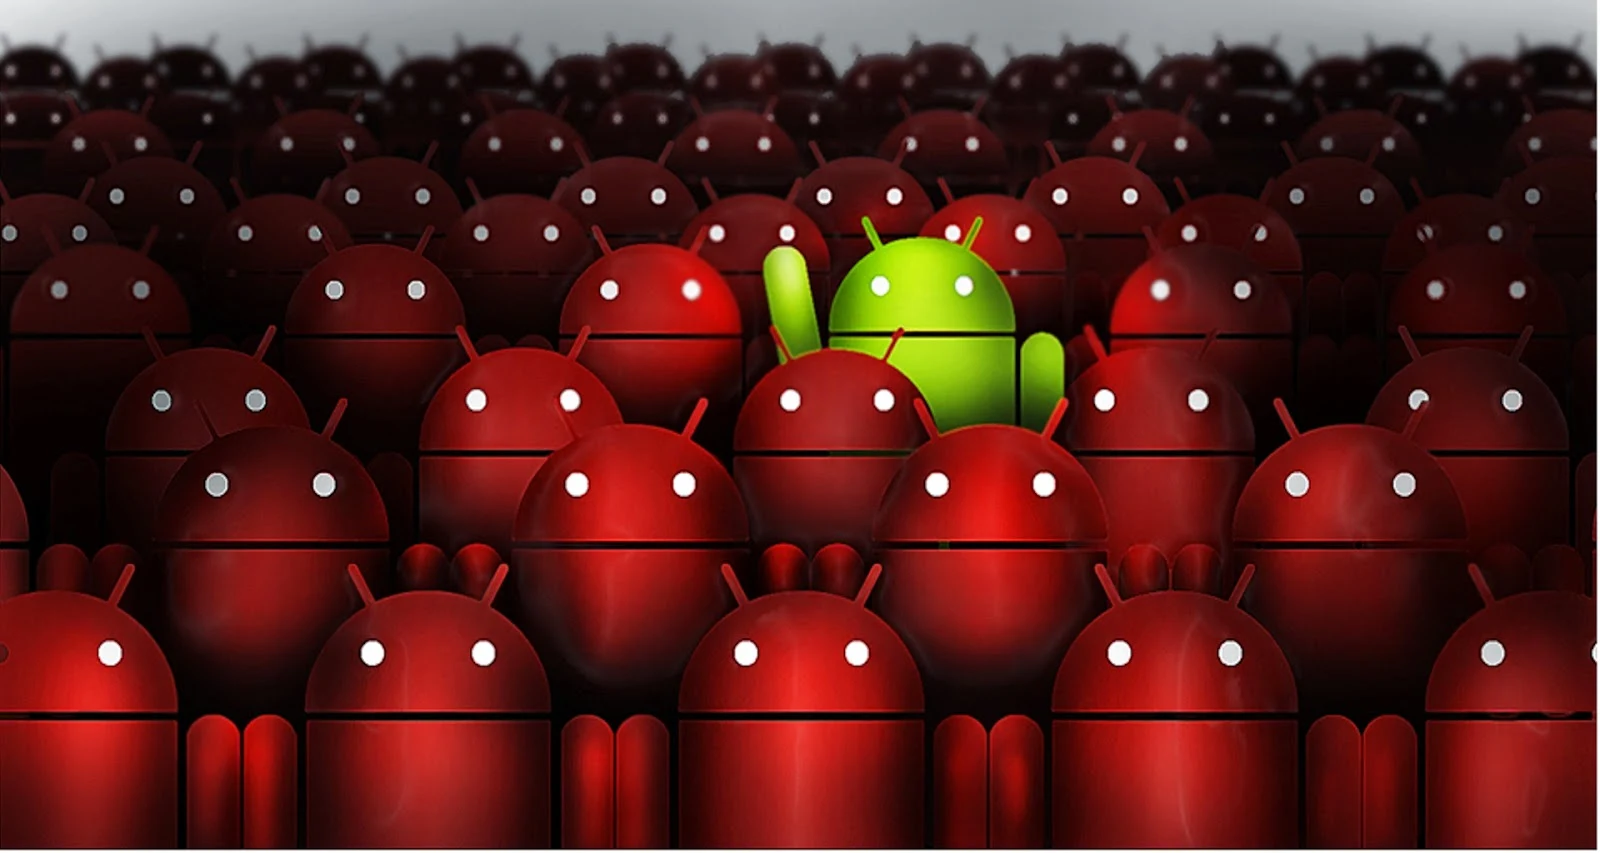 android vulnerable, Critical Vulnerability Put Billions of Android Device Under Threats,hacking android devices, android vulnerability, android ahcking apps,  apps for hackers, android hacking, information security experts, Google vulnerability, android lollipop vulnerability, security of android, billion of devices 